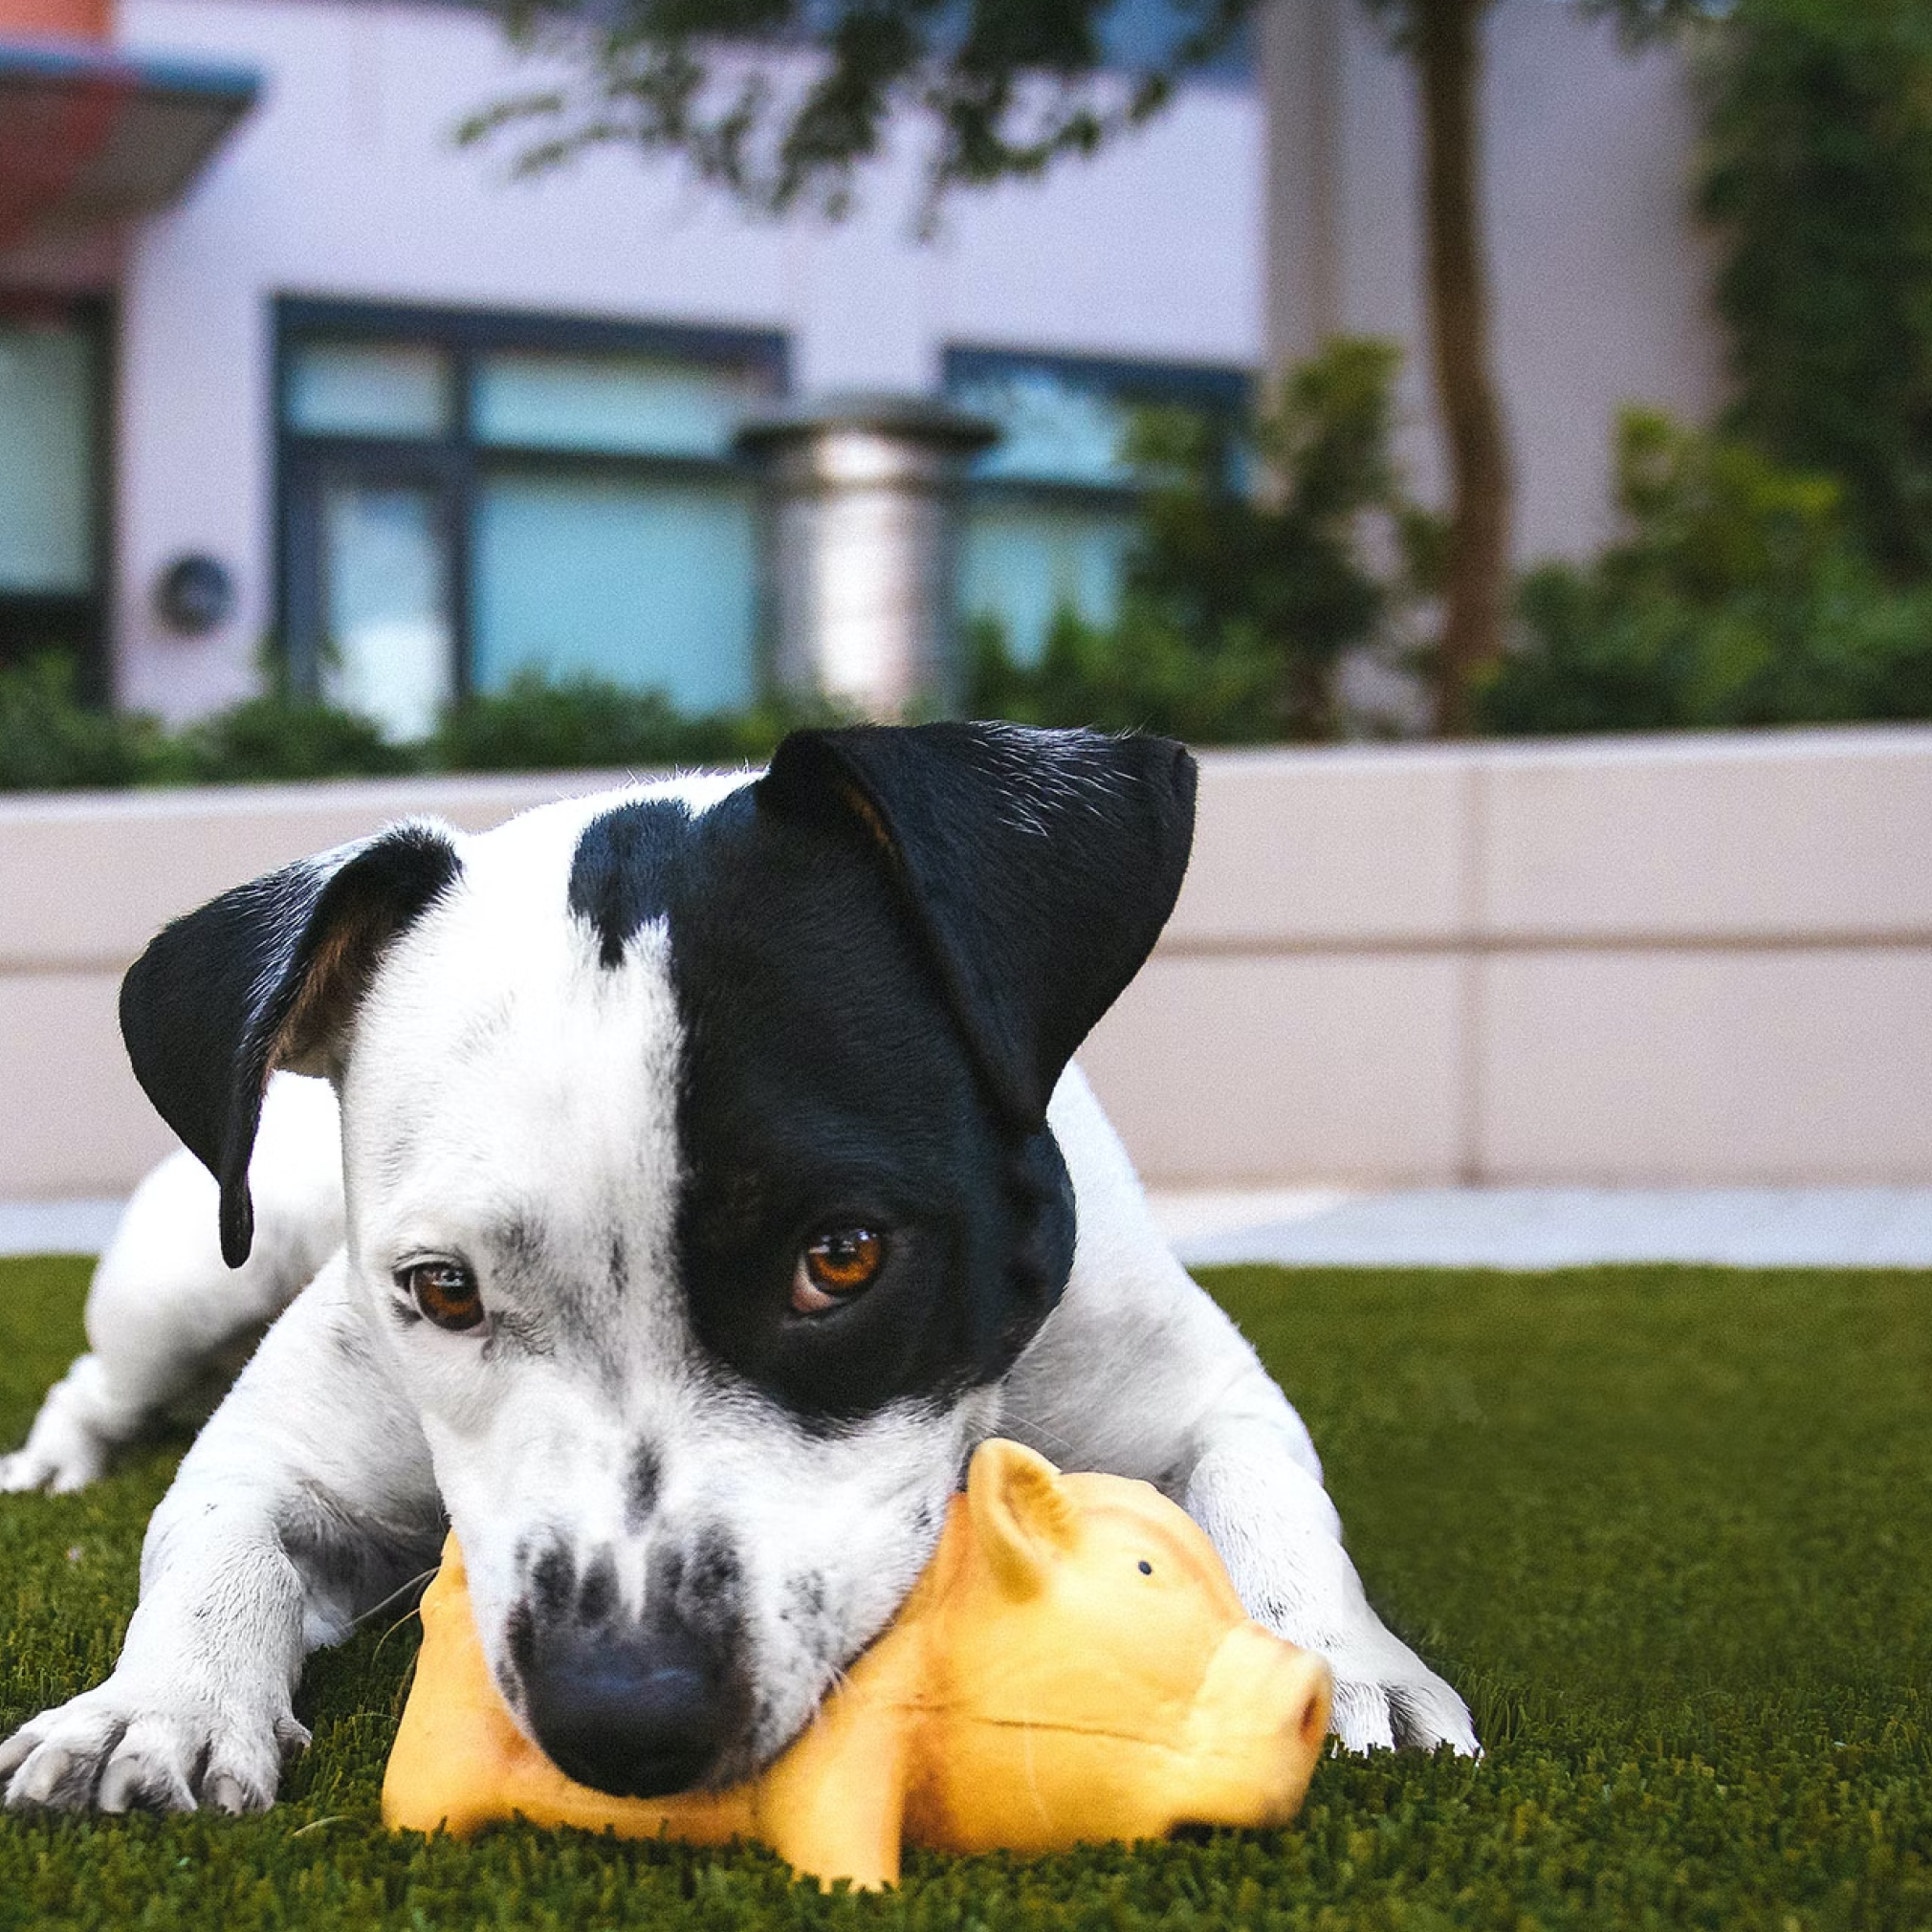 Black and white dog playing with toy.